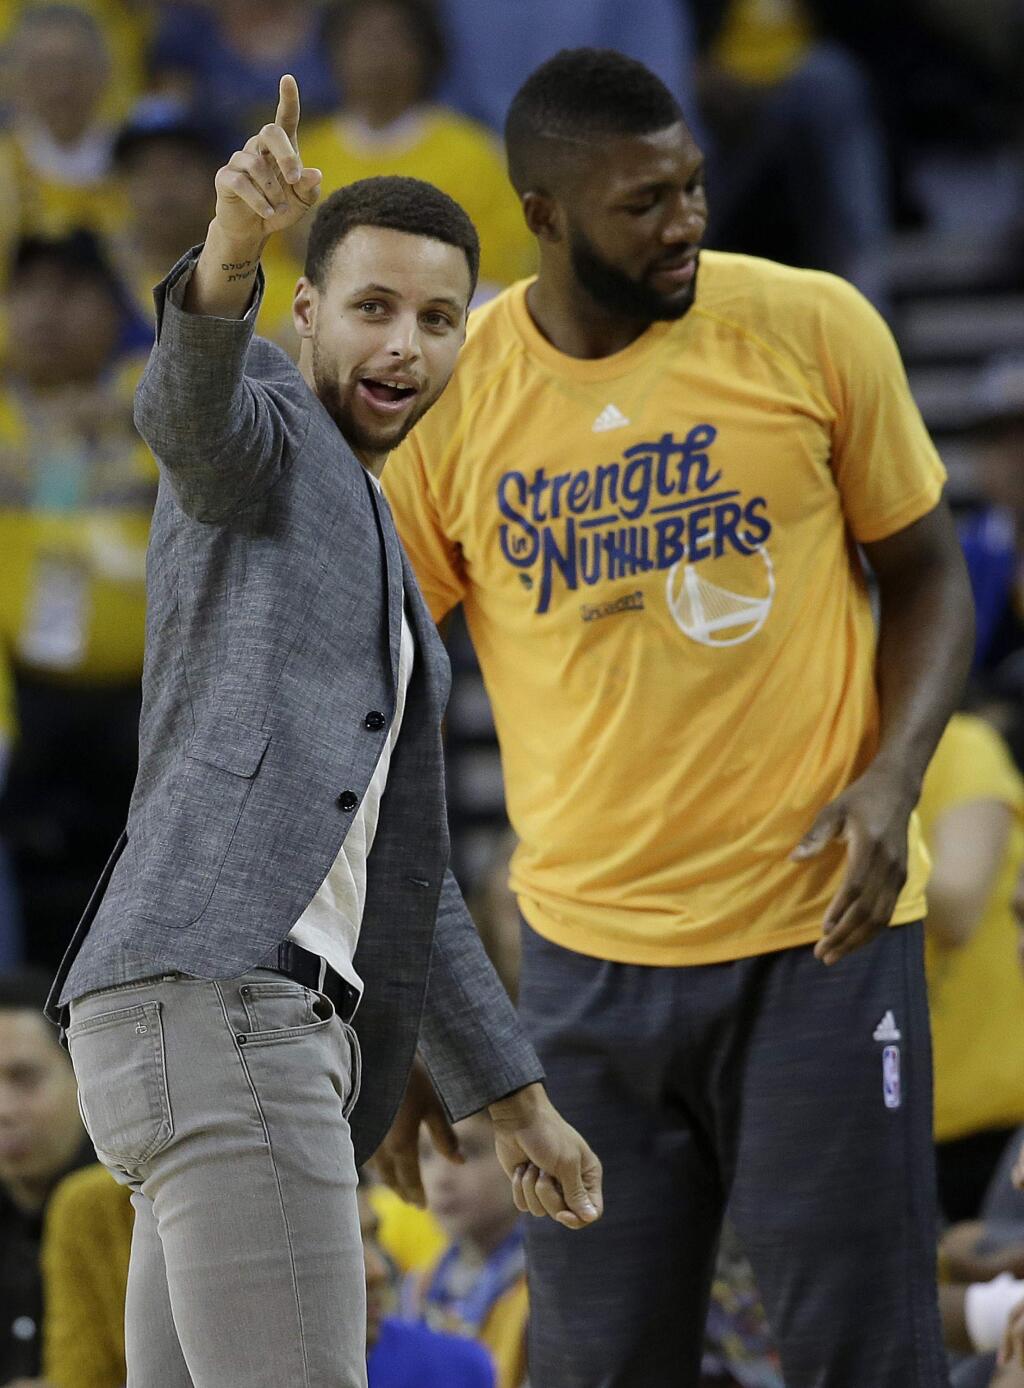 Golden State Warriors guard Stephen Curry, left, gestures next to center Festus Ezeli from the bench during the first half in Game 2 of a second-round NBA basketball playoff series against the Portland Trail Blazers in Oakland, Calif., Tuesday, May 3, 2016. (AP Photo/Marcio Jose Sanchez)